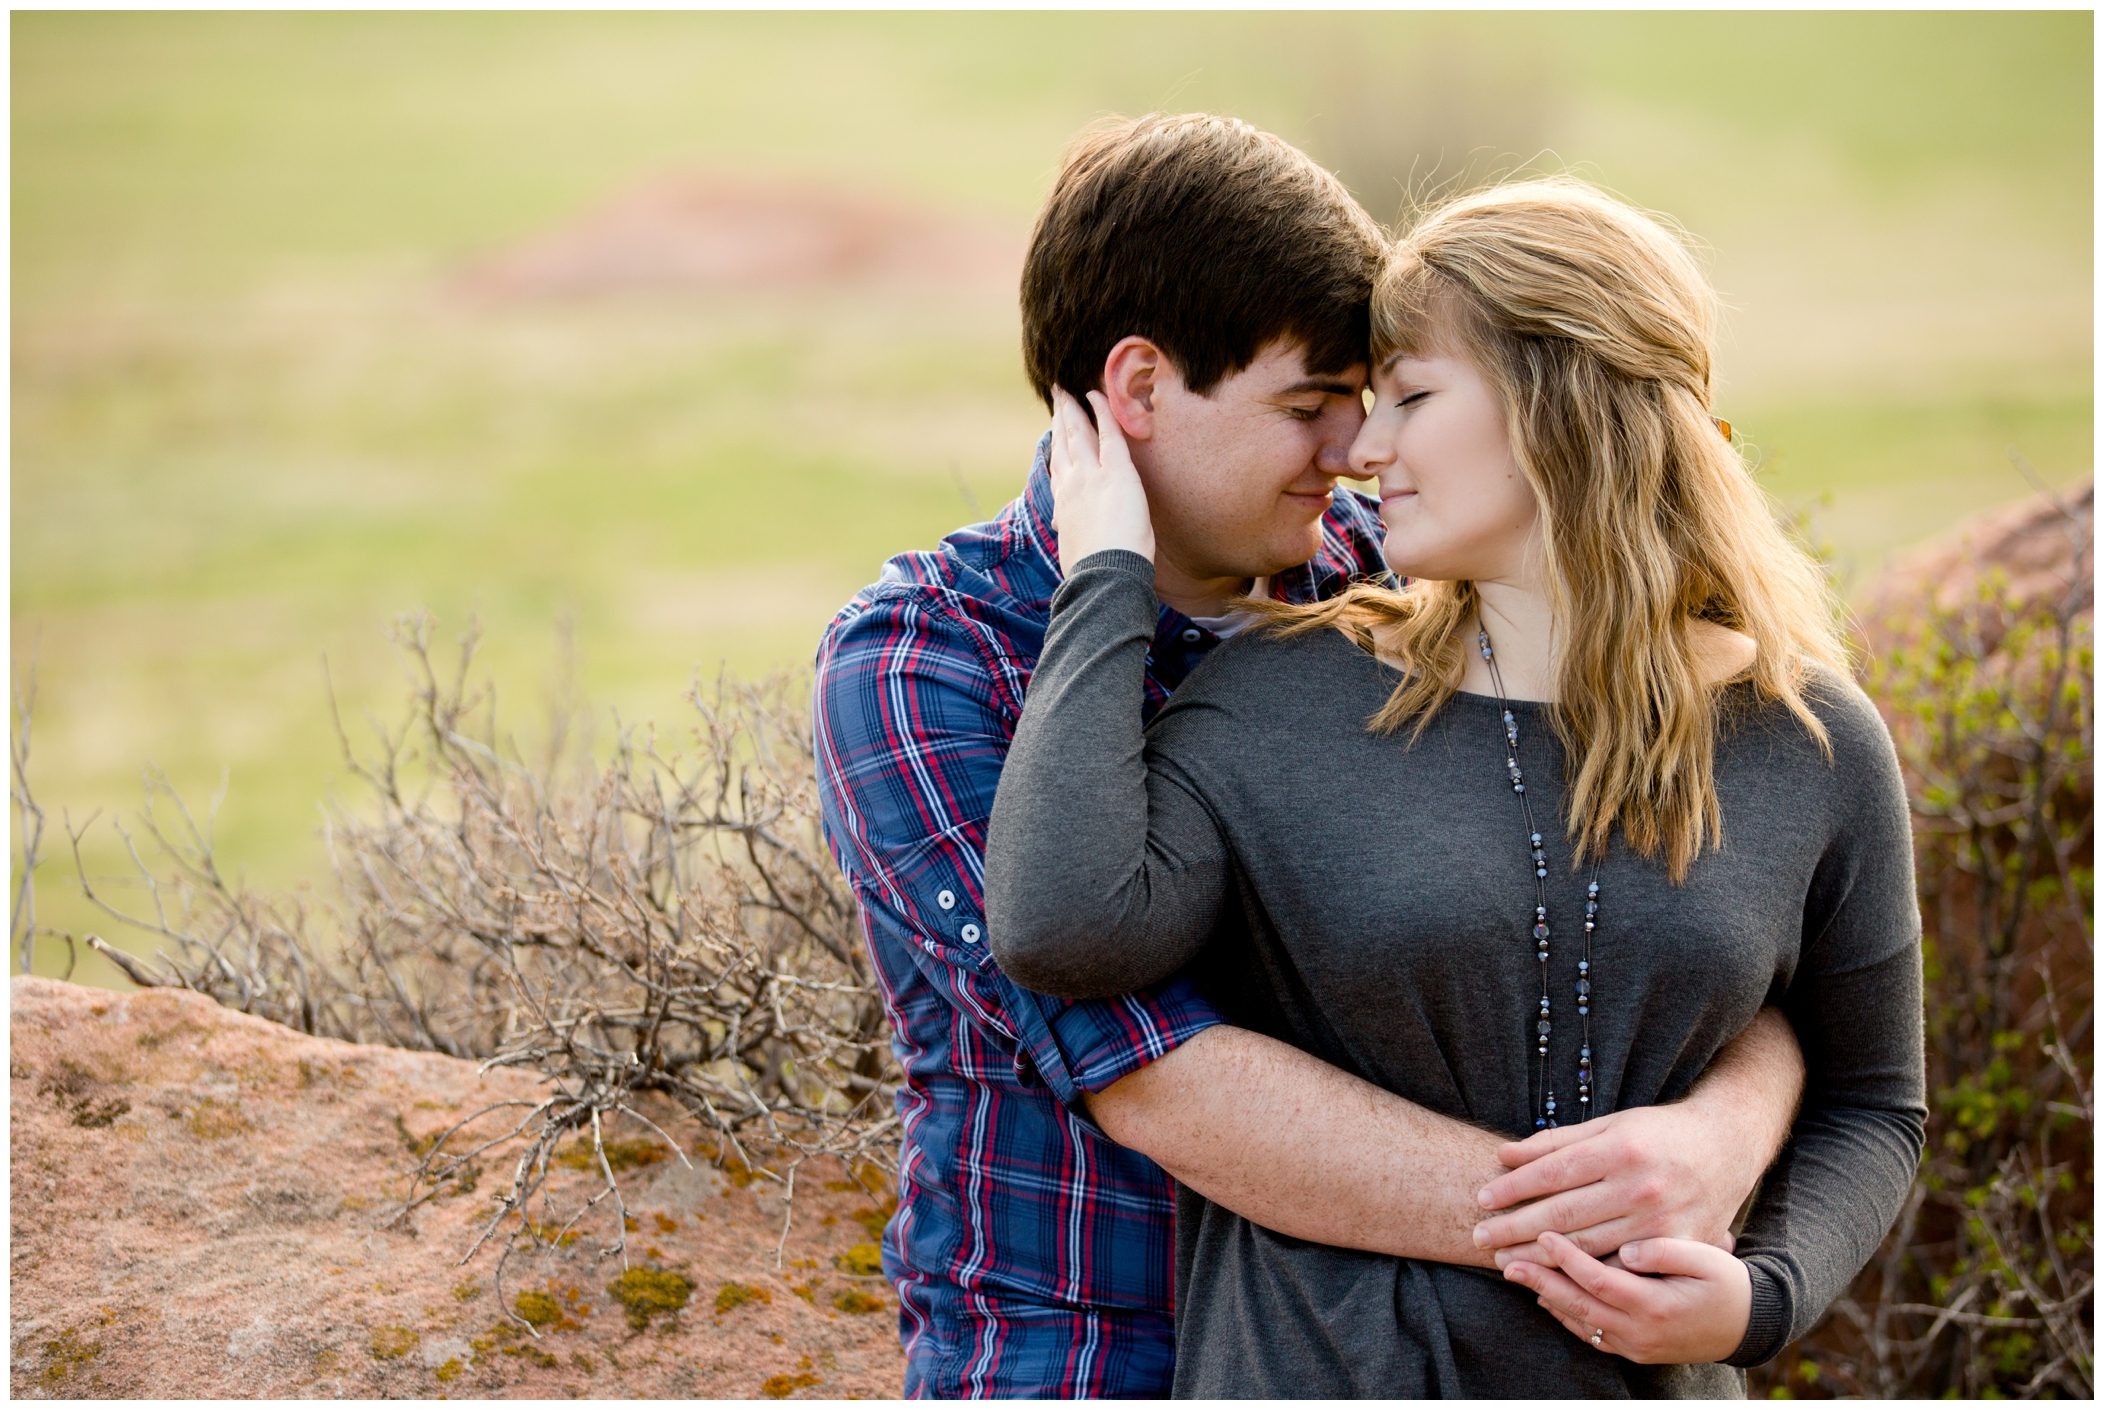 Golden, CO engagement photography